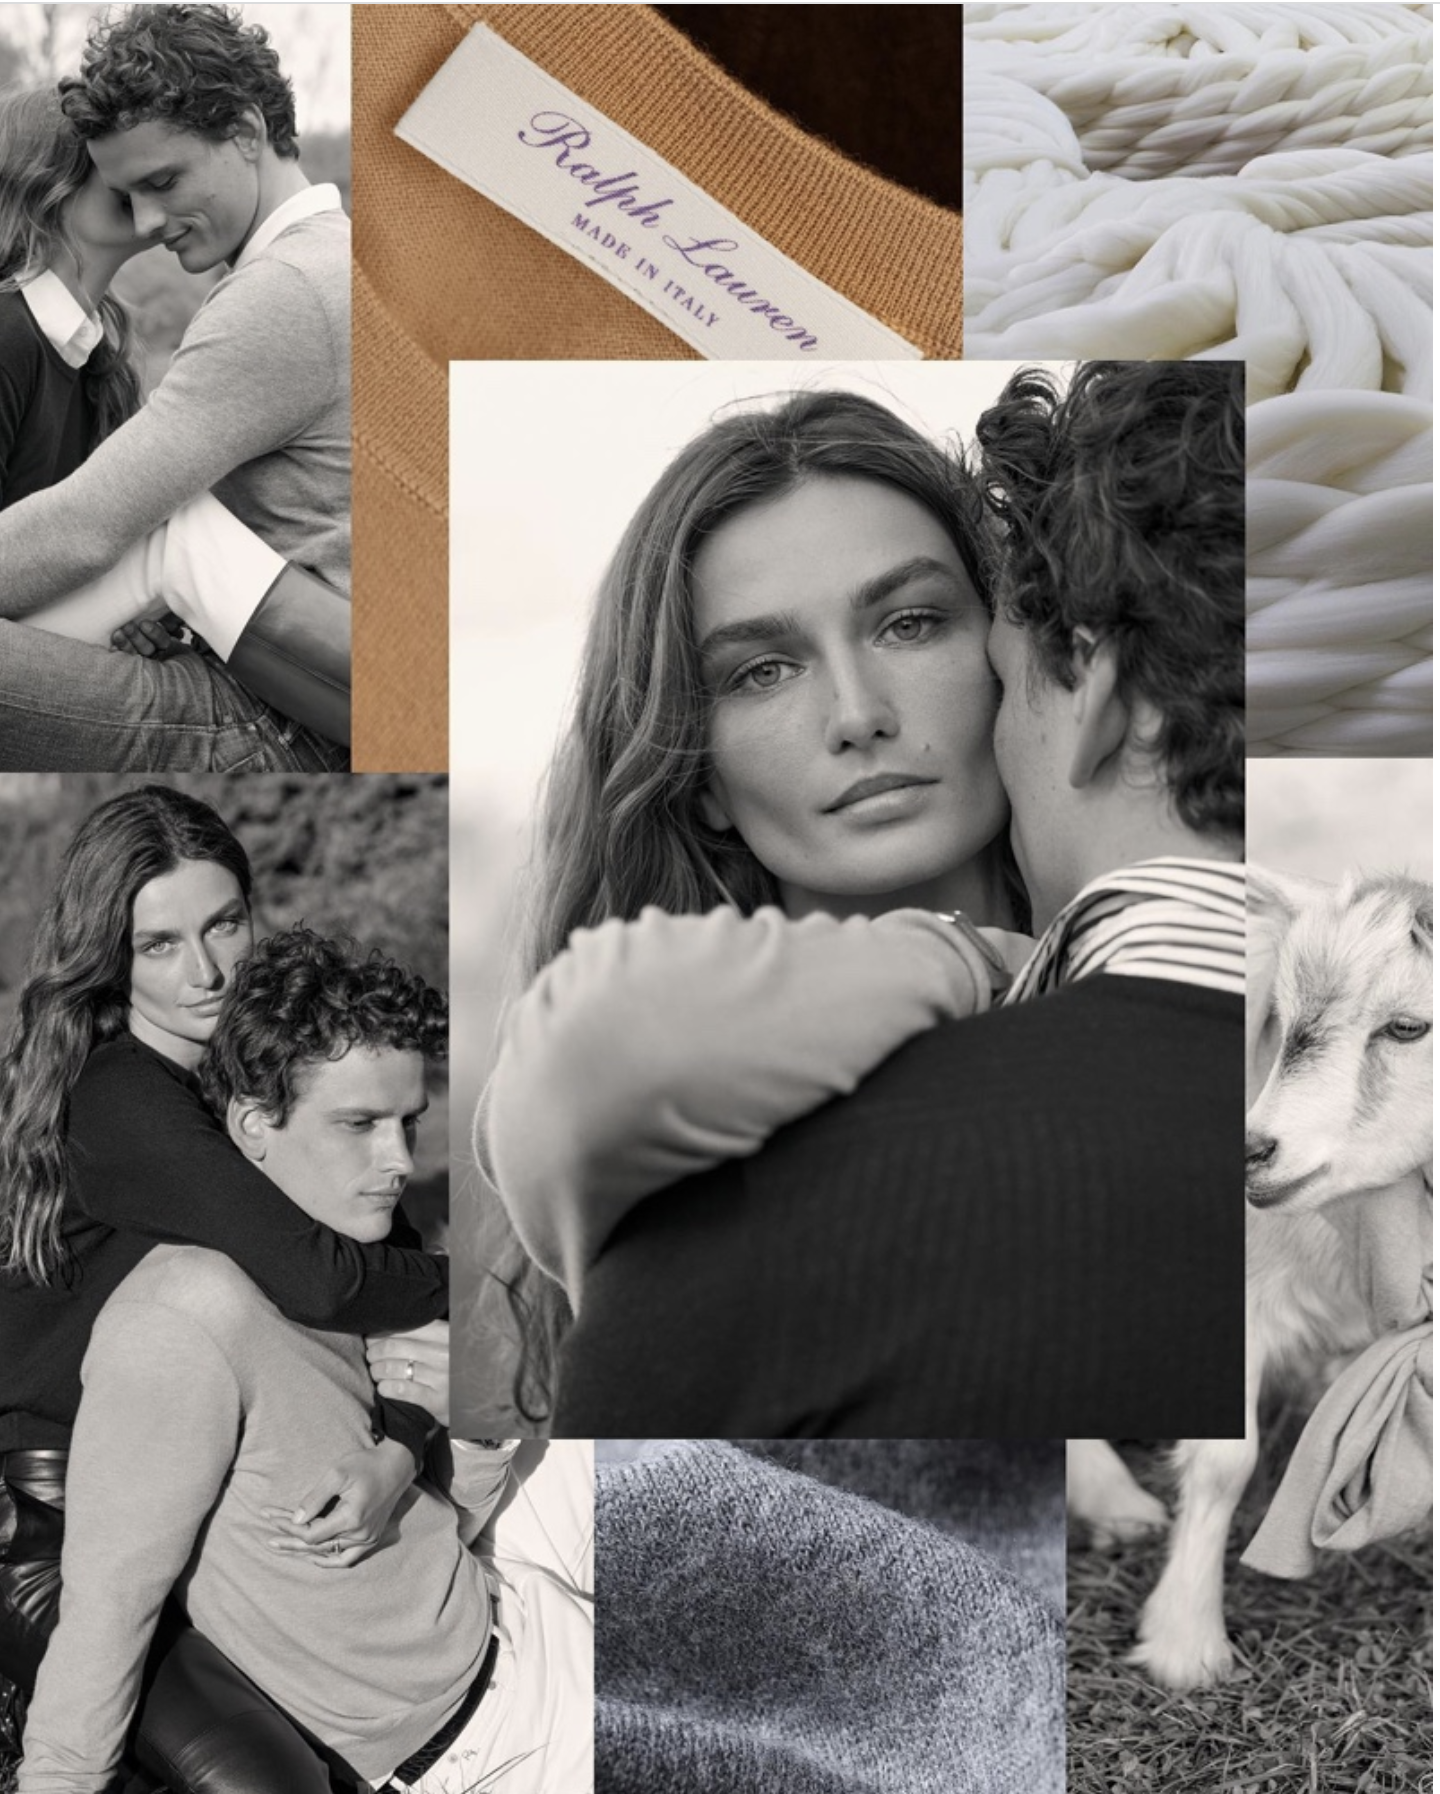 Ralph-Lauren-Cradle-to-Cradle-Certified-Gold-Cashmere-Campaign-00004.png